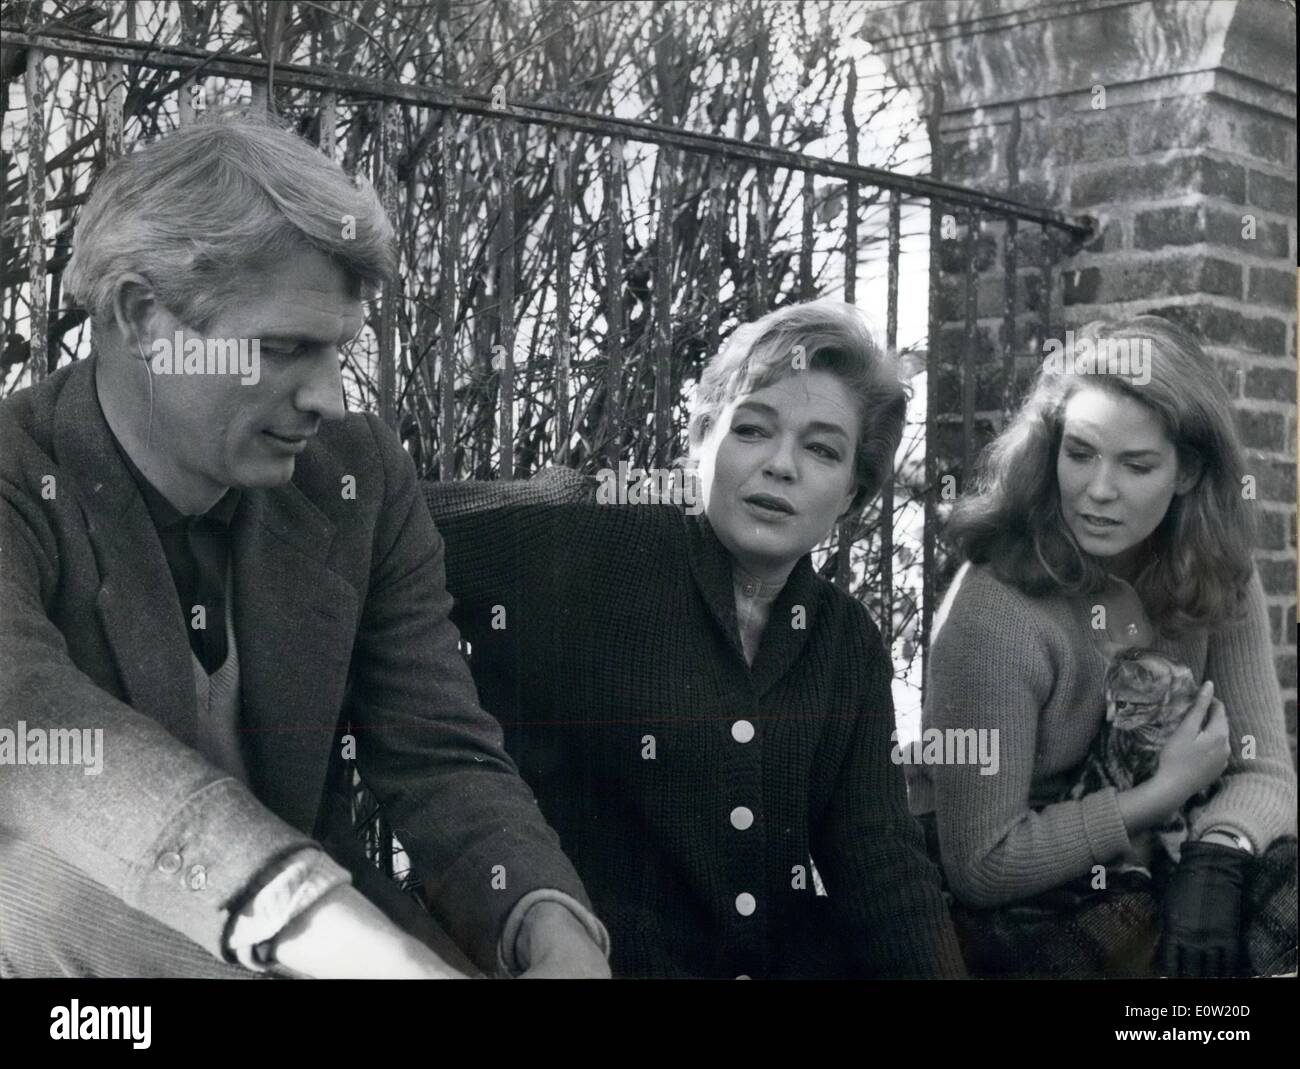 Dec. 12, 1960 - Simone Signoret Back To French Films: Simone Signoret, Yves Montand's Wife, The Famous French Actress, Is Starring In A French Film For The First Time In Five Years. The Film (''Les Mauvais Coups'') Is Based On Roger Vailland's Story Which Was Awarded The Concourt A Prize. Co-Starring With Her Are Alexandra Stewart And Reginald D. Kernan, An American Six-Footer Who Was A Doctor Before He Became An Actor. From Left To Right: Reginald D. Kernan, Simone Signoret And Alexandra Stewart Pictured On The Location. Stock Photo